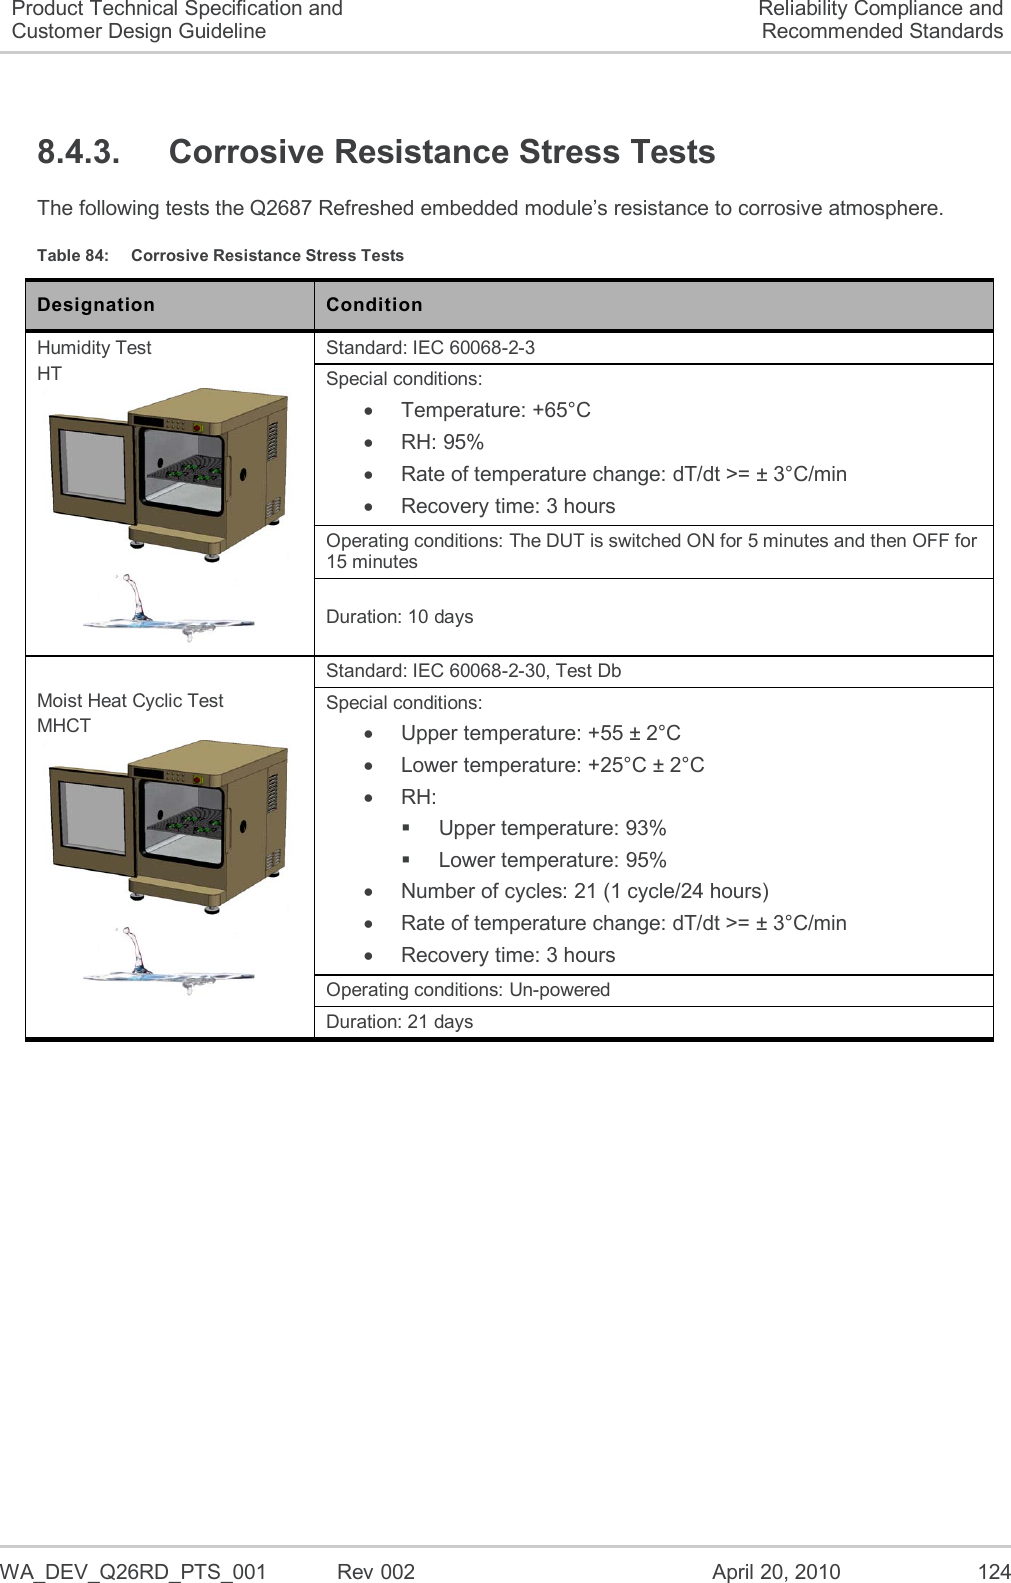   WA_DEV_Q26RD_PTS_001  Rev 002  April 20, 2010 124 Product Technical Specification and Customer Design Guideline Reliability Compliance and Recommended Standards 8.4.3.  Corrosive Resistance Stress Tests The following tests the Q2687 Refreshed embedded module’s resistance to corrosive atmosphere. Table 84:  Corrosive Resistance Stress Tests Designation Condition Humidity Test HT   Standard: IEC 60068-2-3 Special conditions:   Temperature: +65°C  RH: 95%   Rate of temperature change: dT/dt &gt;= ± 3°C/min   Recovery time: 3 hours Operating conditions: The DUT is switched ON for 5 minutes and then OFF for 15 minutes Duration: 10 days Moist Heat Cyclic Test MHCT   Standard: IEC 60068-2-30, Test Db Special conditions:   Upper temperature: +55 ± 2°C   Lower temperature: +25°C ± 2°C  RH:   Upper temperature: 93%   Lower temperature: 95%   Number of cycles: 21 (1 cycle/24 hours)   Rate of temperature change: dT/dt &gt;= ± 3°C/min   Recovery time: 3 hours Operating conditions: Un-powered Duration: 21 days 